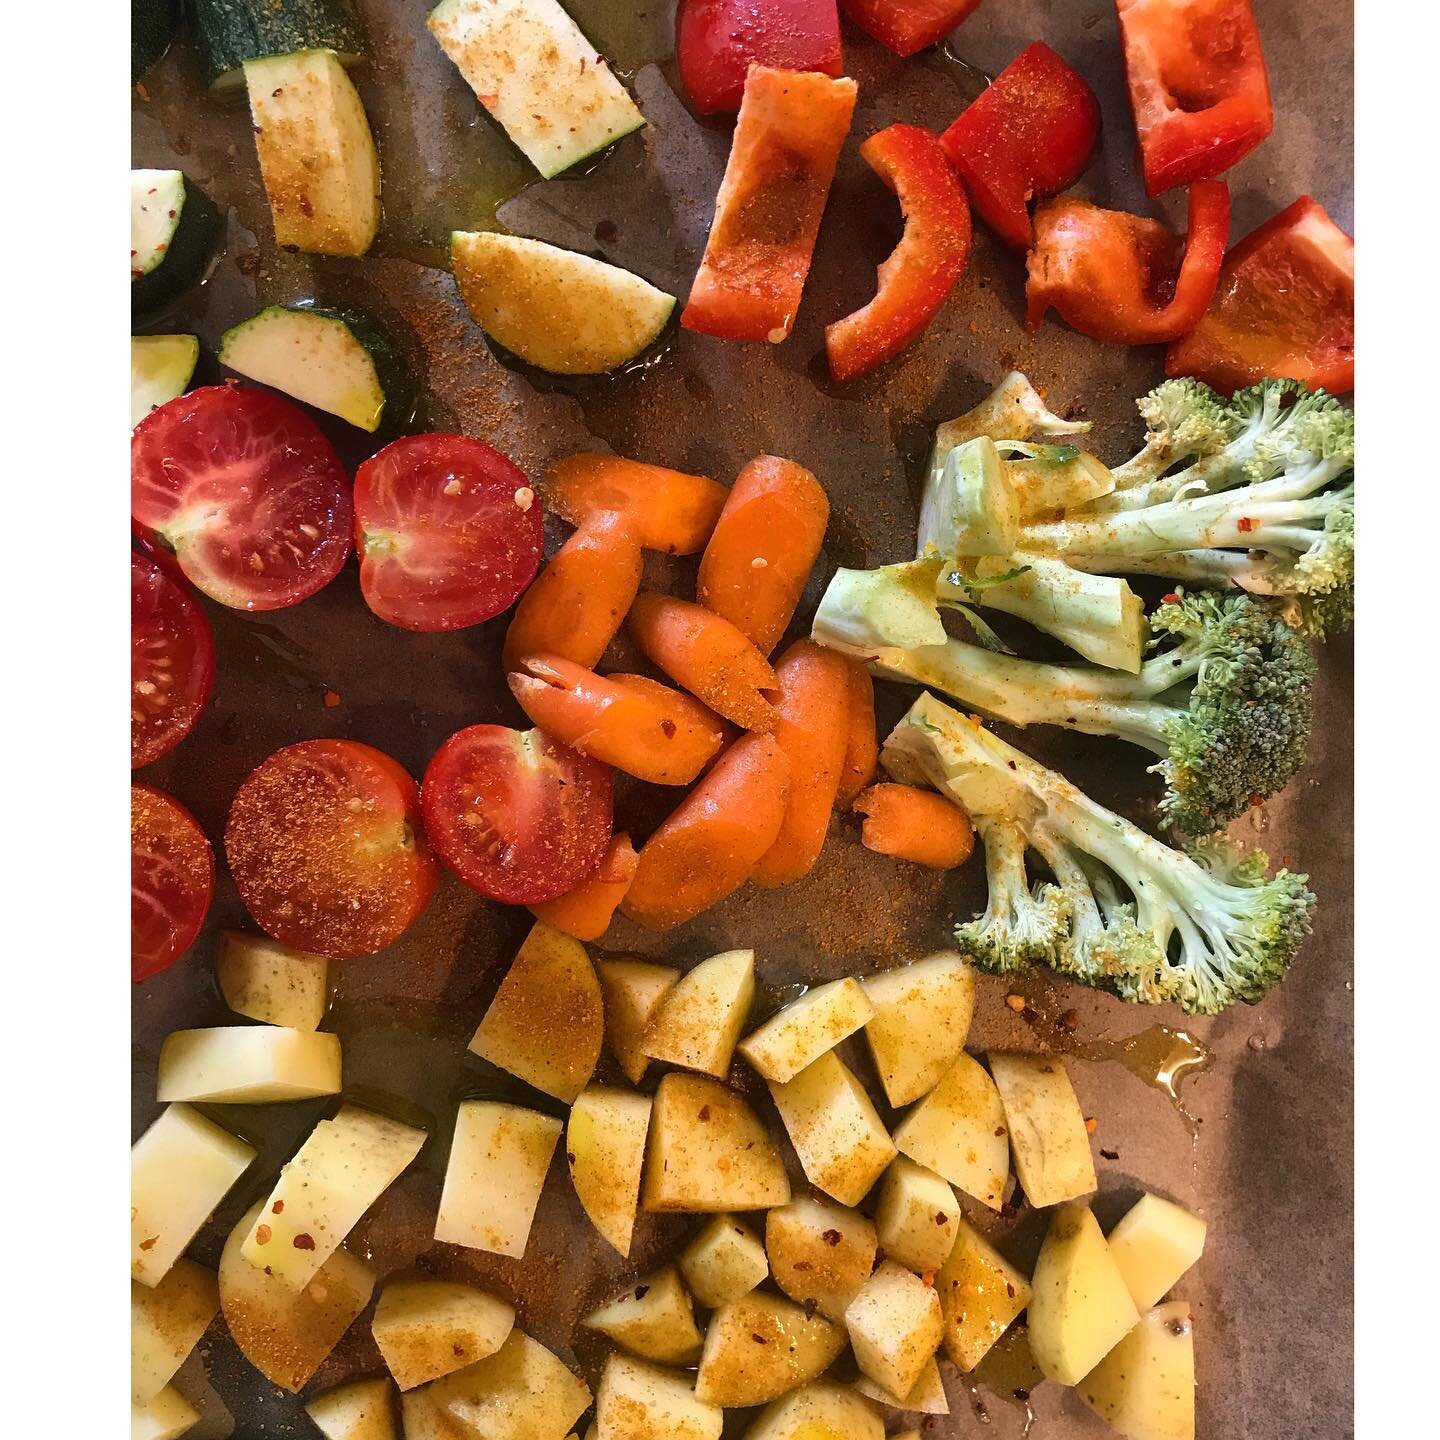 Can&rsquo;t be bothered with dinner? 
Oven roasted veg is never a bad choice. Quick, easy and more nutrient dense than a greasy take away.
Simply chop whatever veg you have available into chunks. Can&rsquo;t think of any vegetable that doesn&rsquo;t 